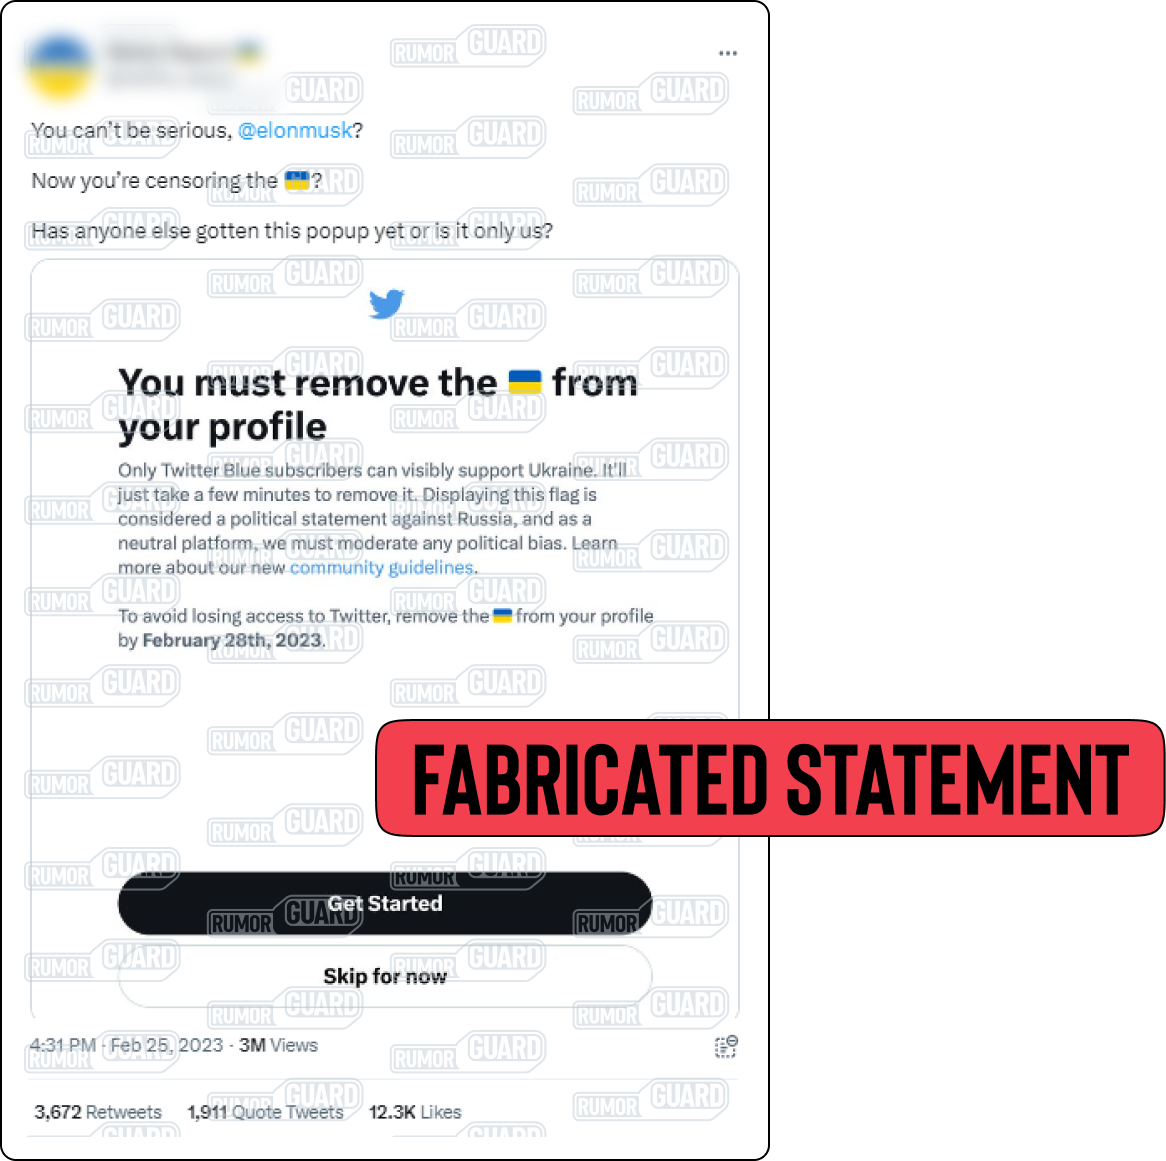 A tweet reads, “You can’t be serious, @elonmusk? Now you’re censoring the [Ukrainian flag]? Has anyone else gotten this popup yet or is it only us?” and includes an image of an alleged statement from Twitter informing users that they must remove the Ukrainian flag from their profiles. The News Literacy Project has added a label that says, “FABRICATED STATEMENT.”